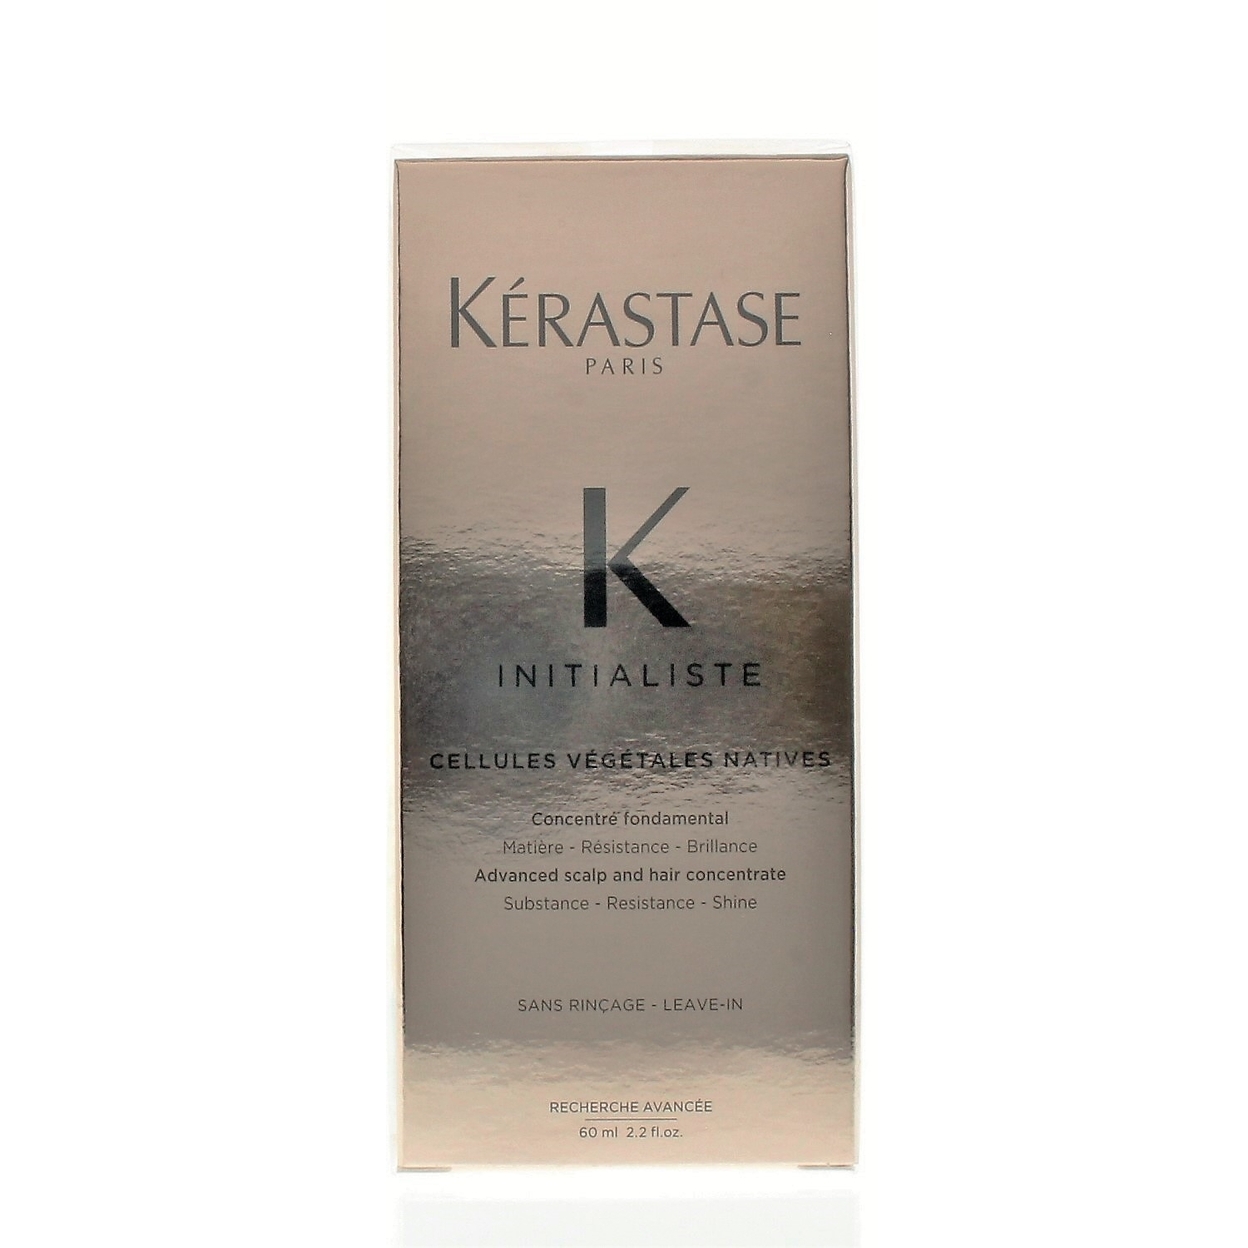 Kerastase Initialiste Cellules Vegetales Natives Advanced Scalp And Hair Concentrate 60ml/2.2oz